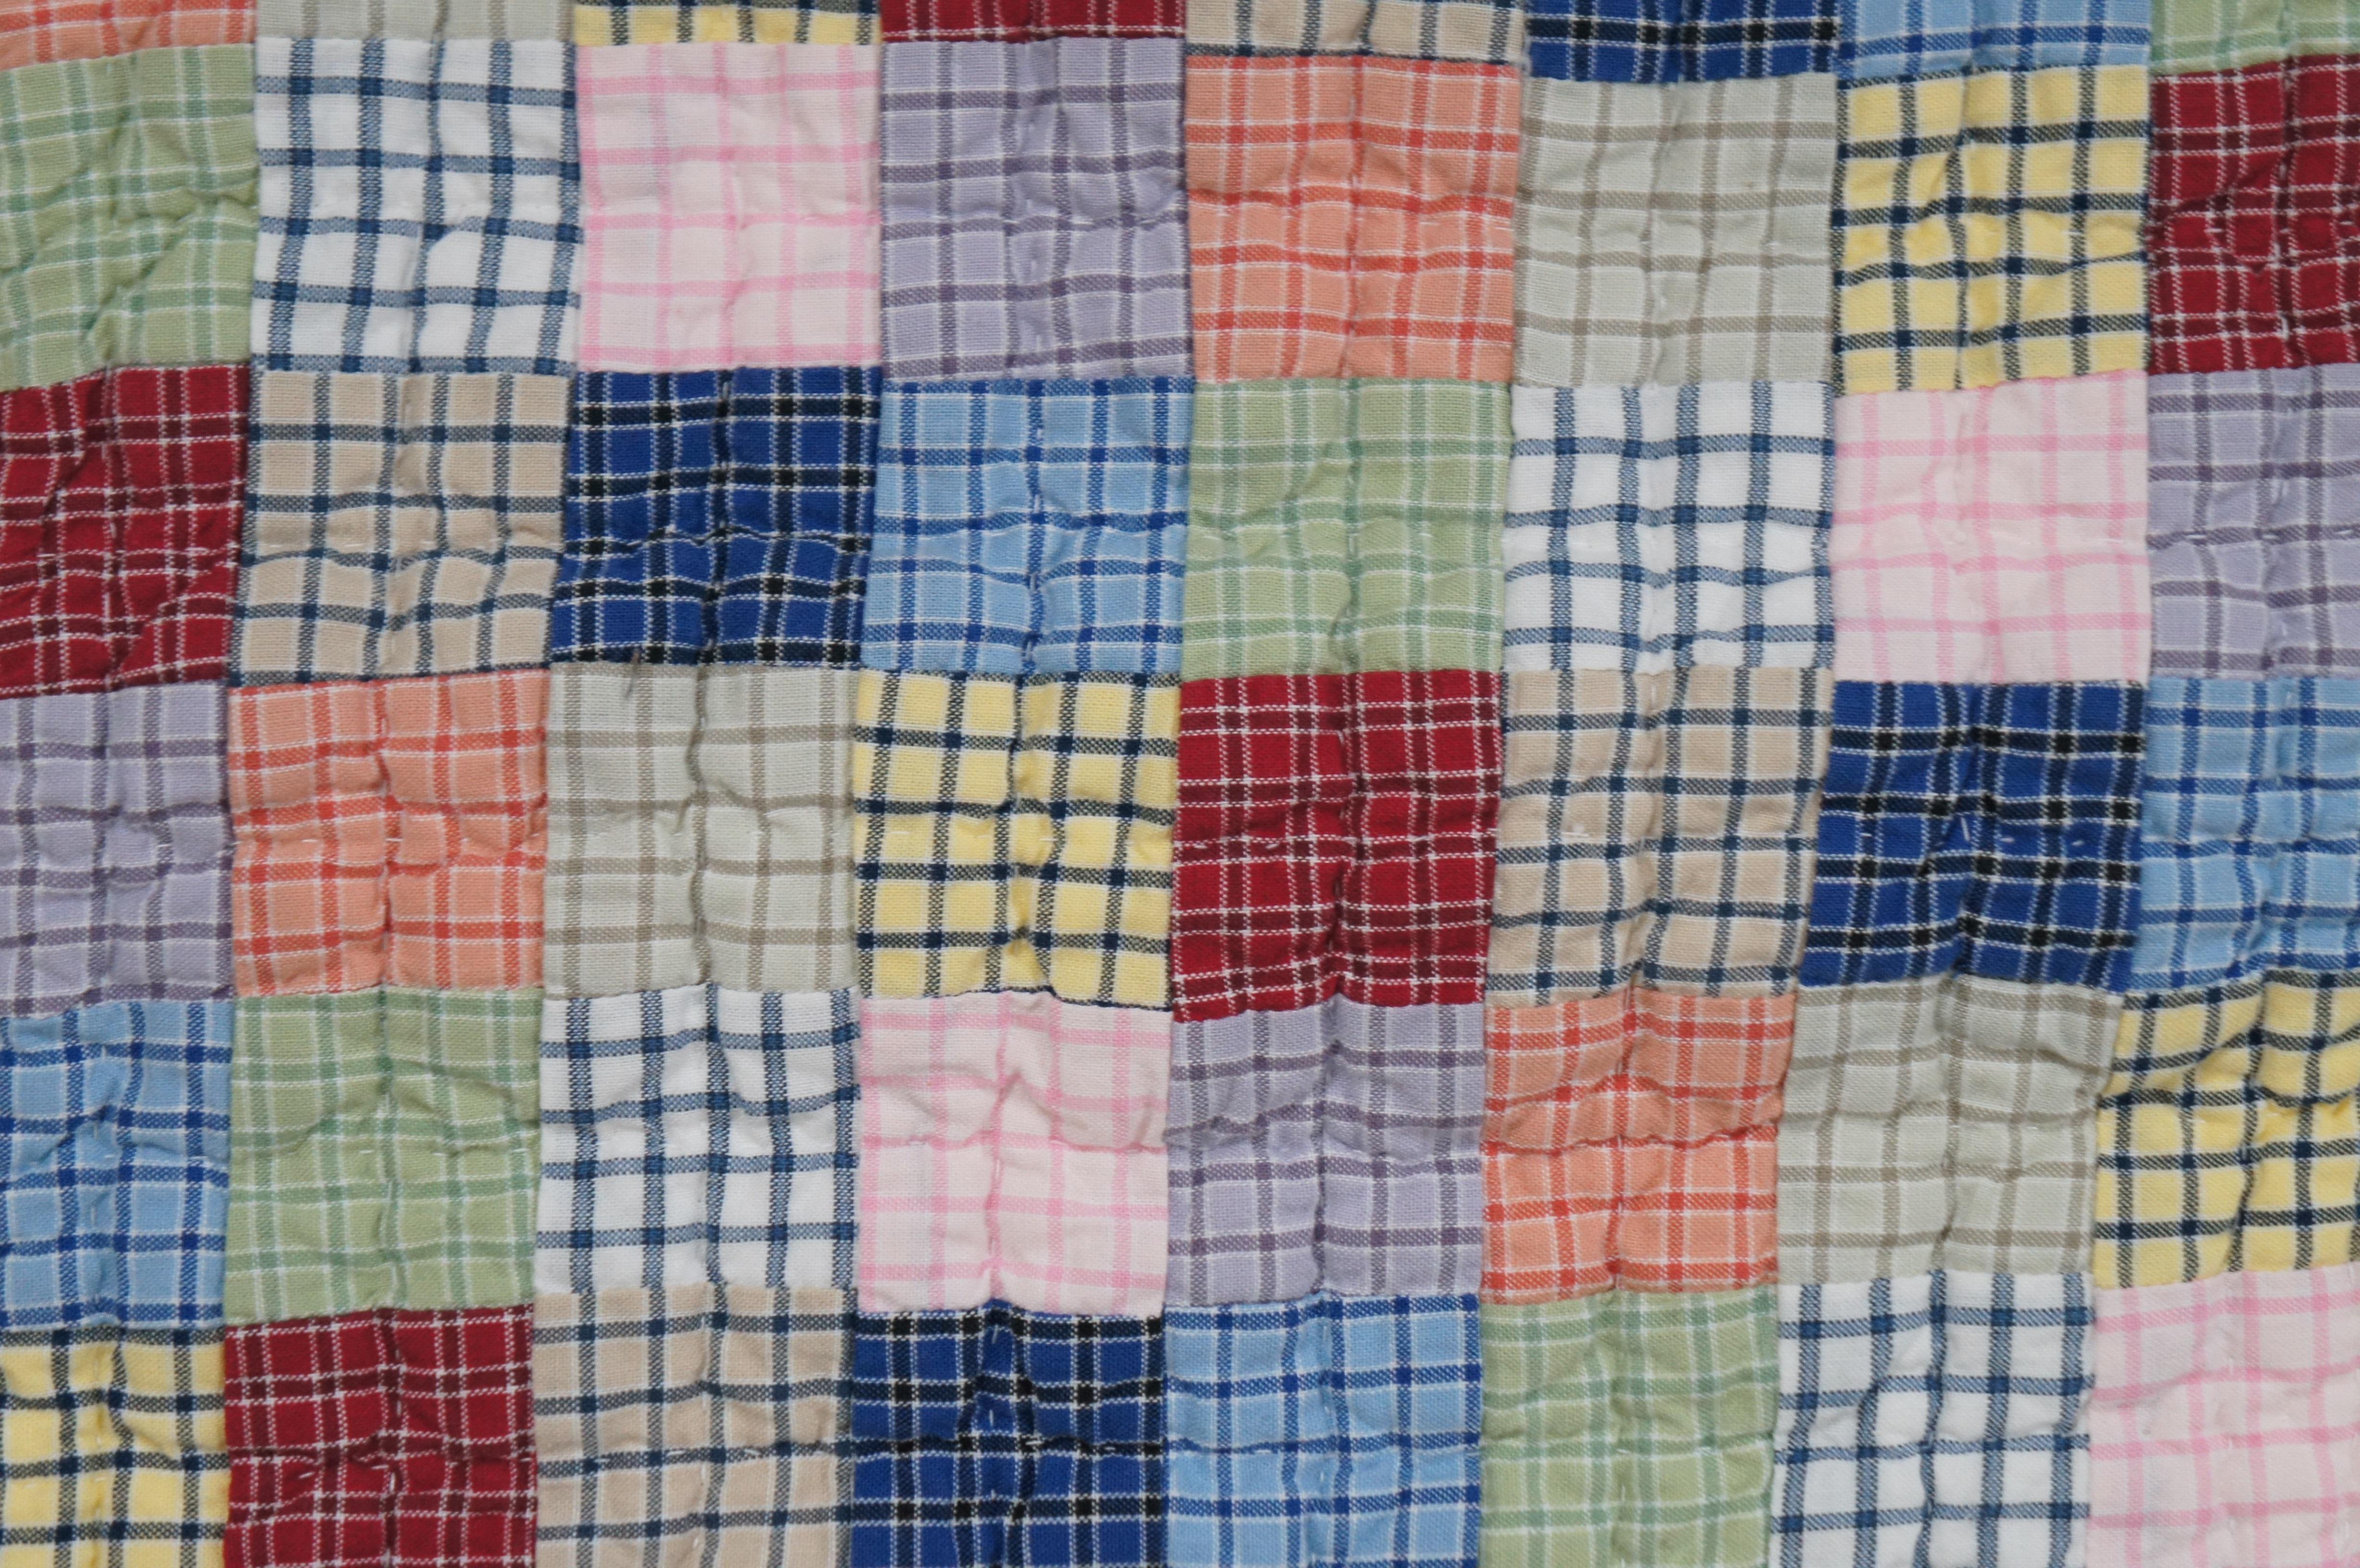 20th Century Antique Folk Art Stitched Geometric Patchwork Quilt Blanket Gingham Check For Sale